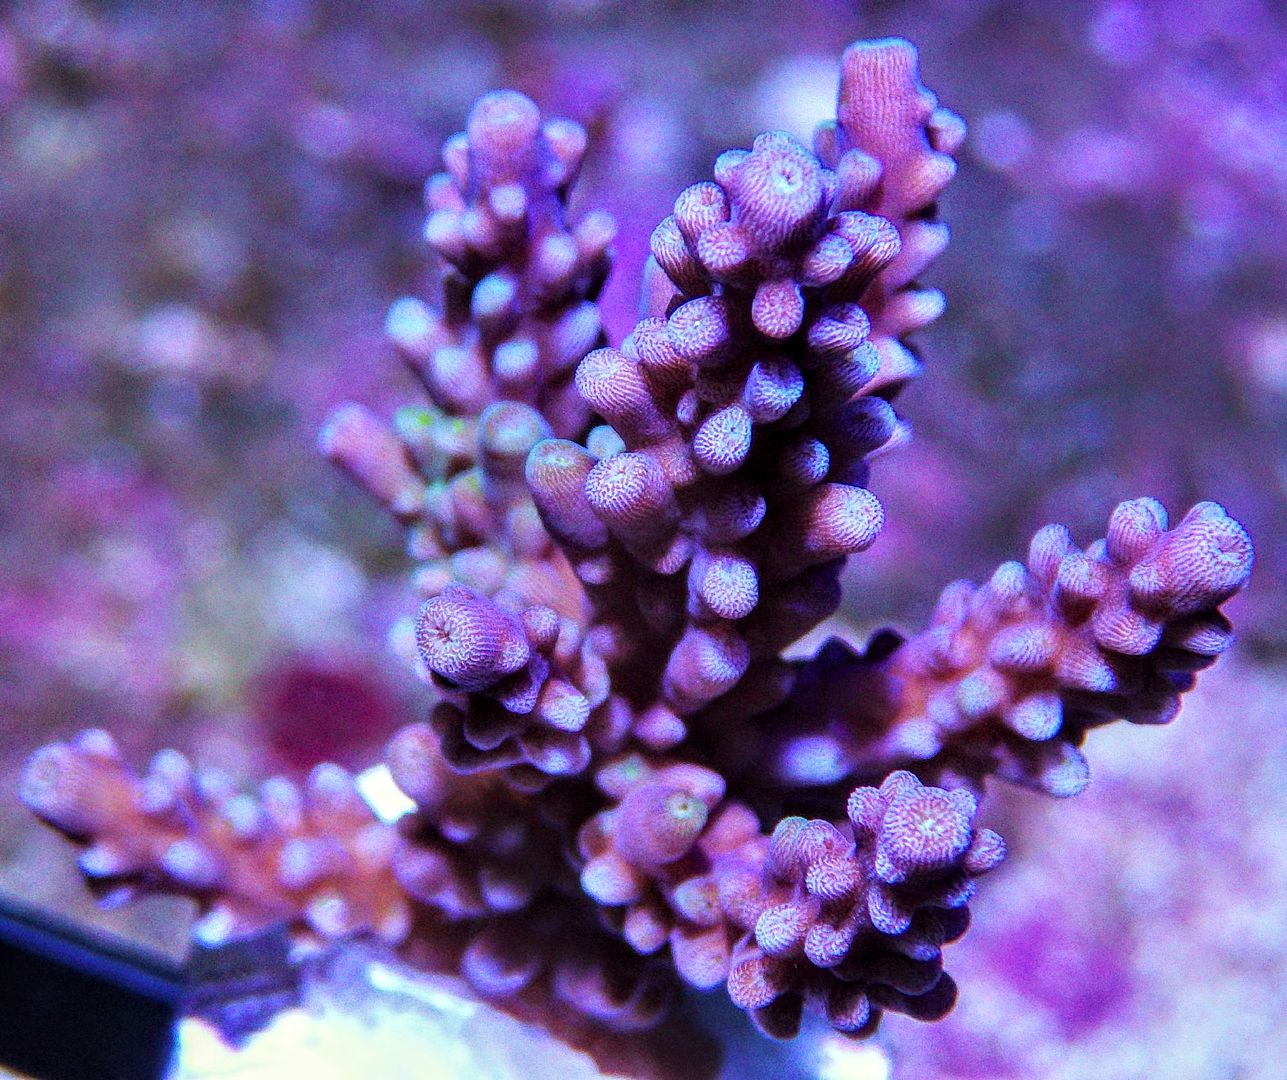 46purpleacropora242 zps3mywdidt - Bargain Frags JUST POSTED